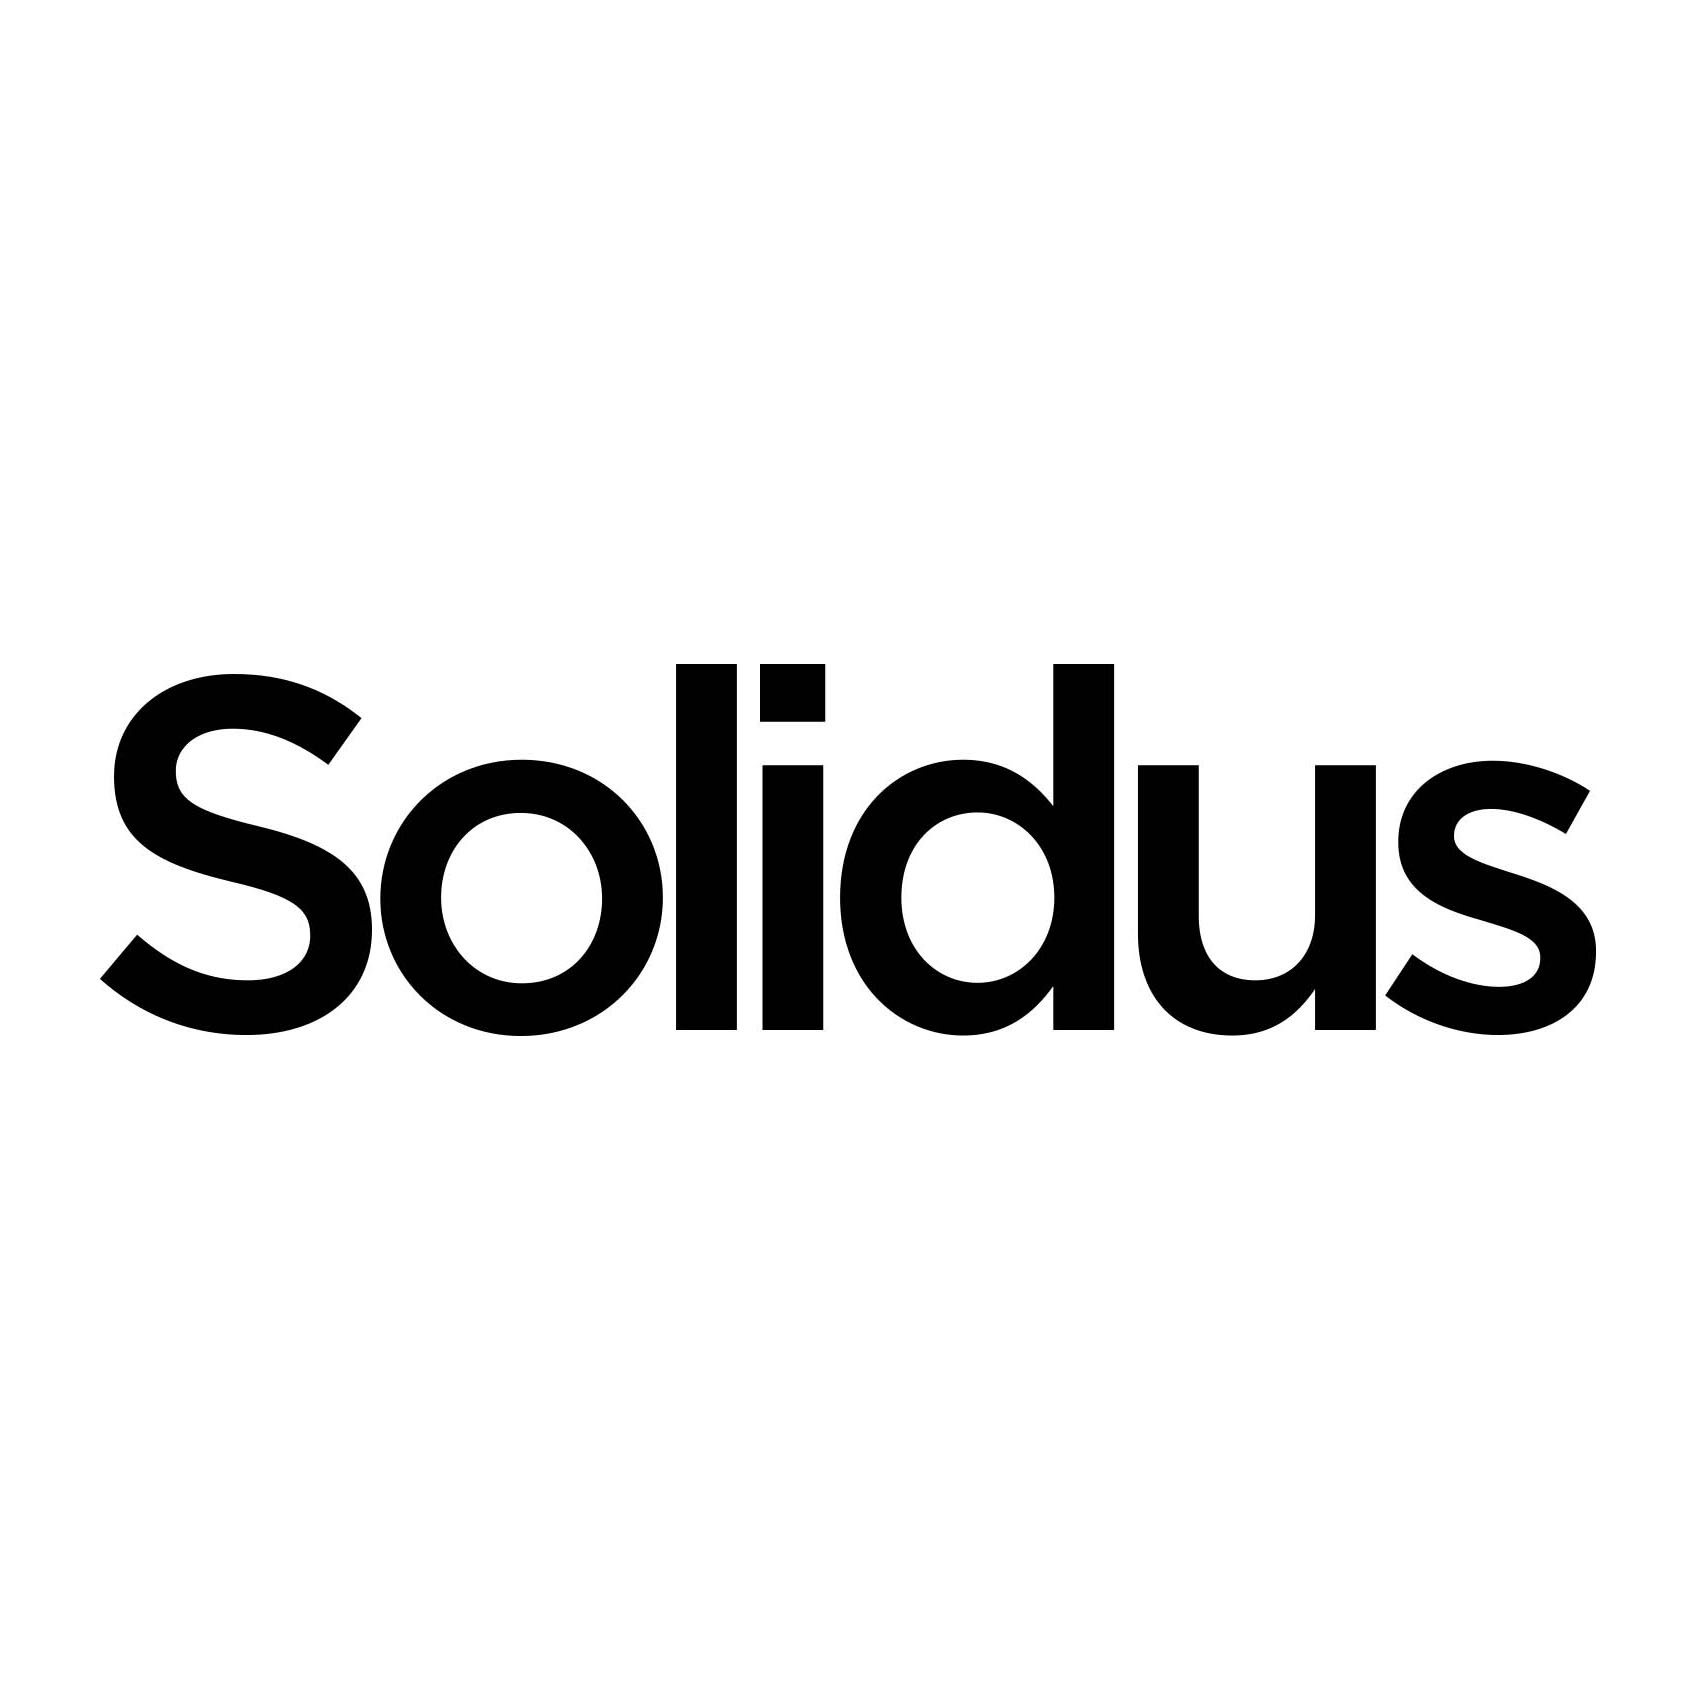 Solidus appoints Rienk Jan van der Kooi as CEO as it enters a new phase ...